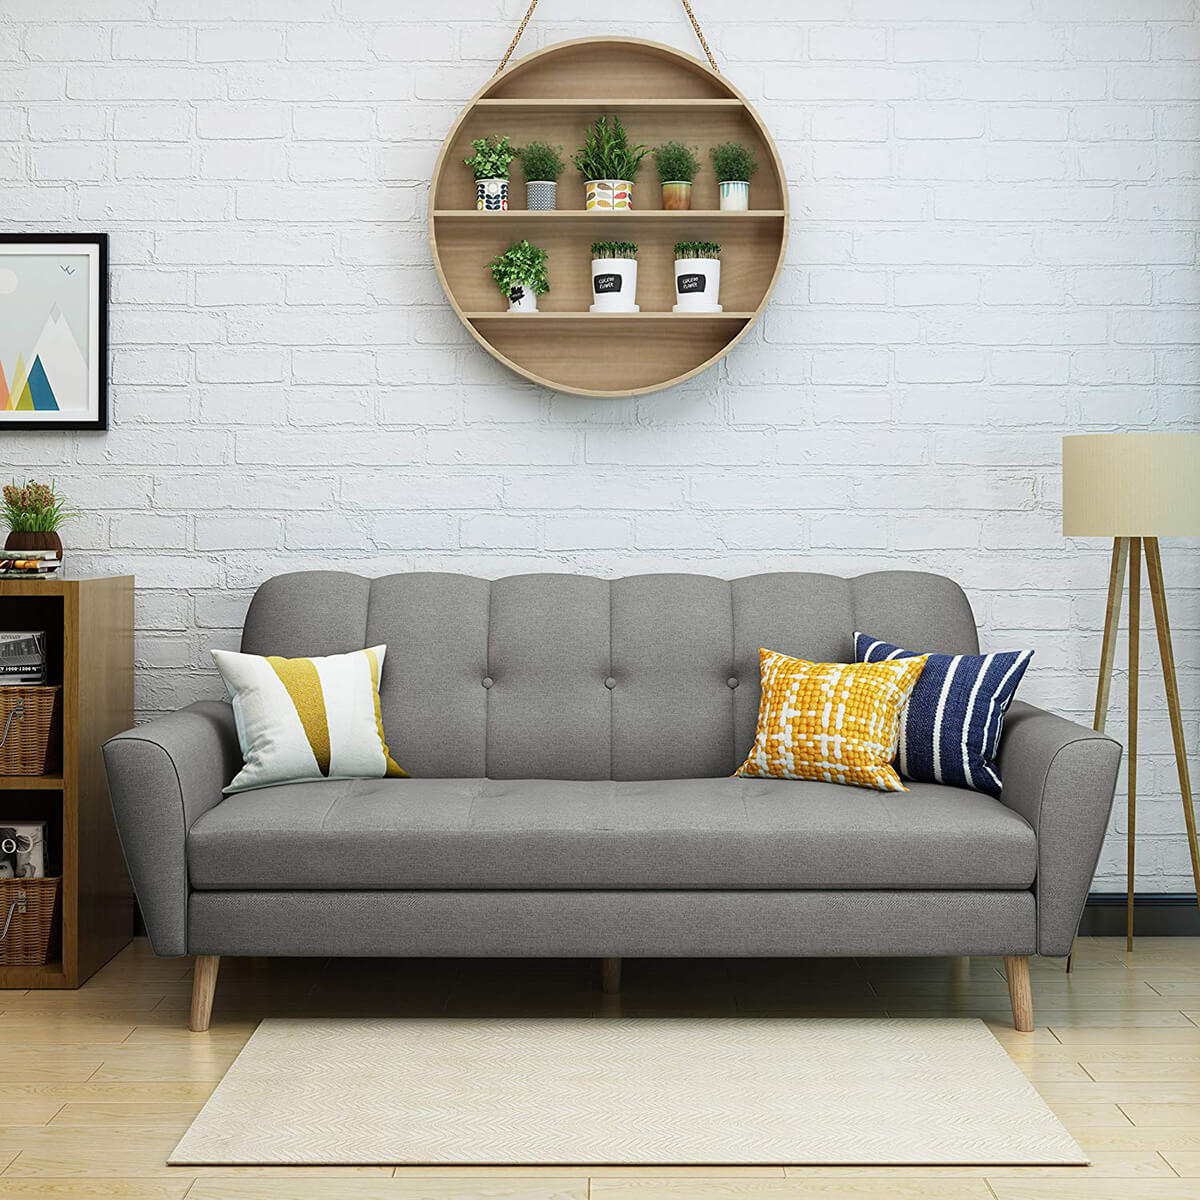 Sofas Can Fill a Supporting Role